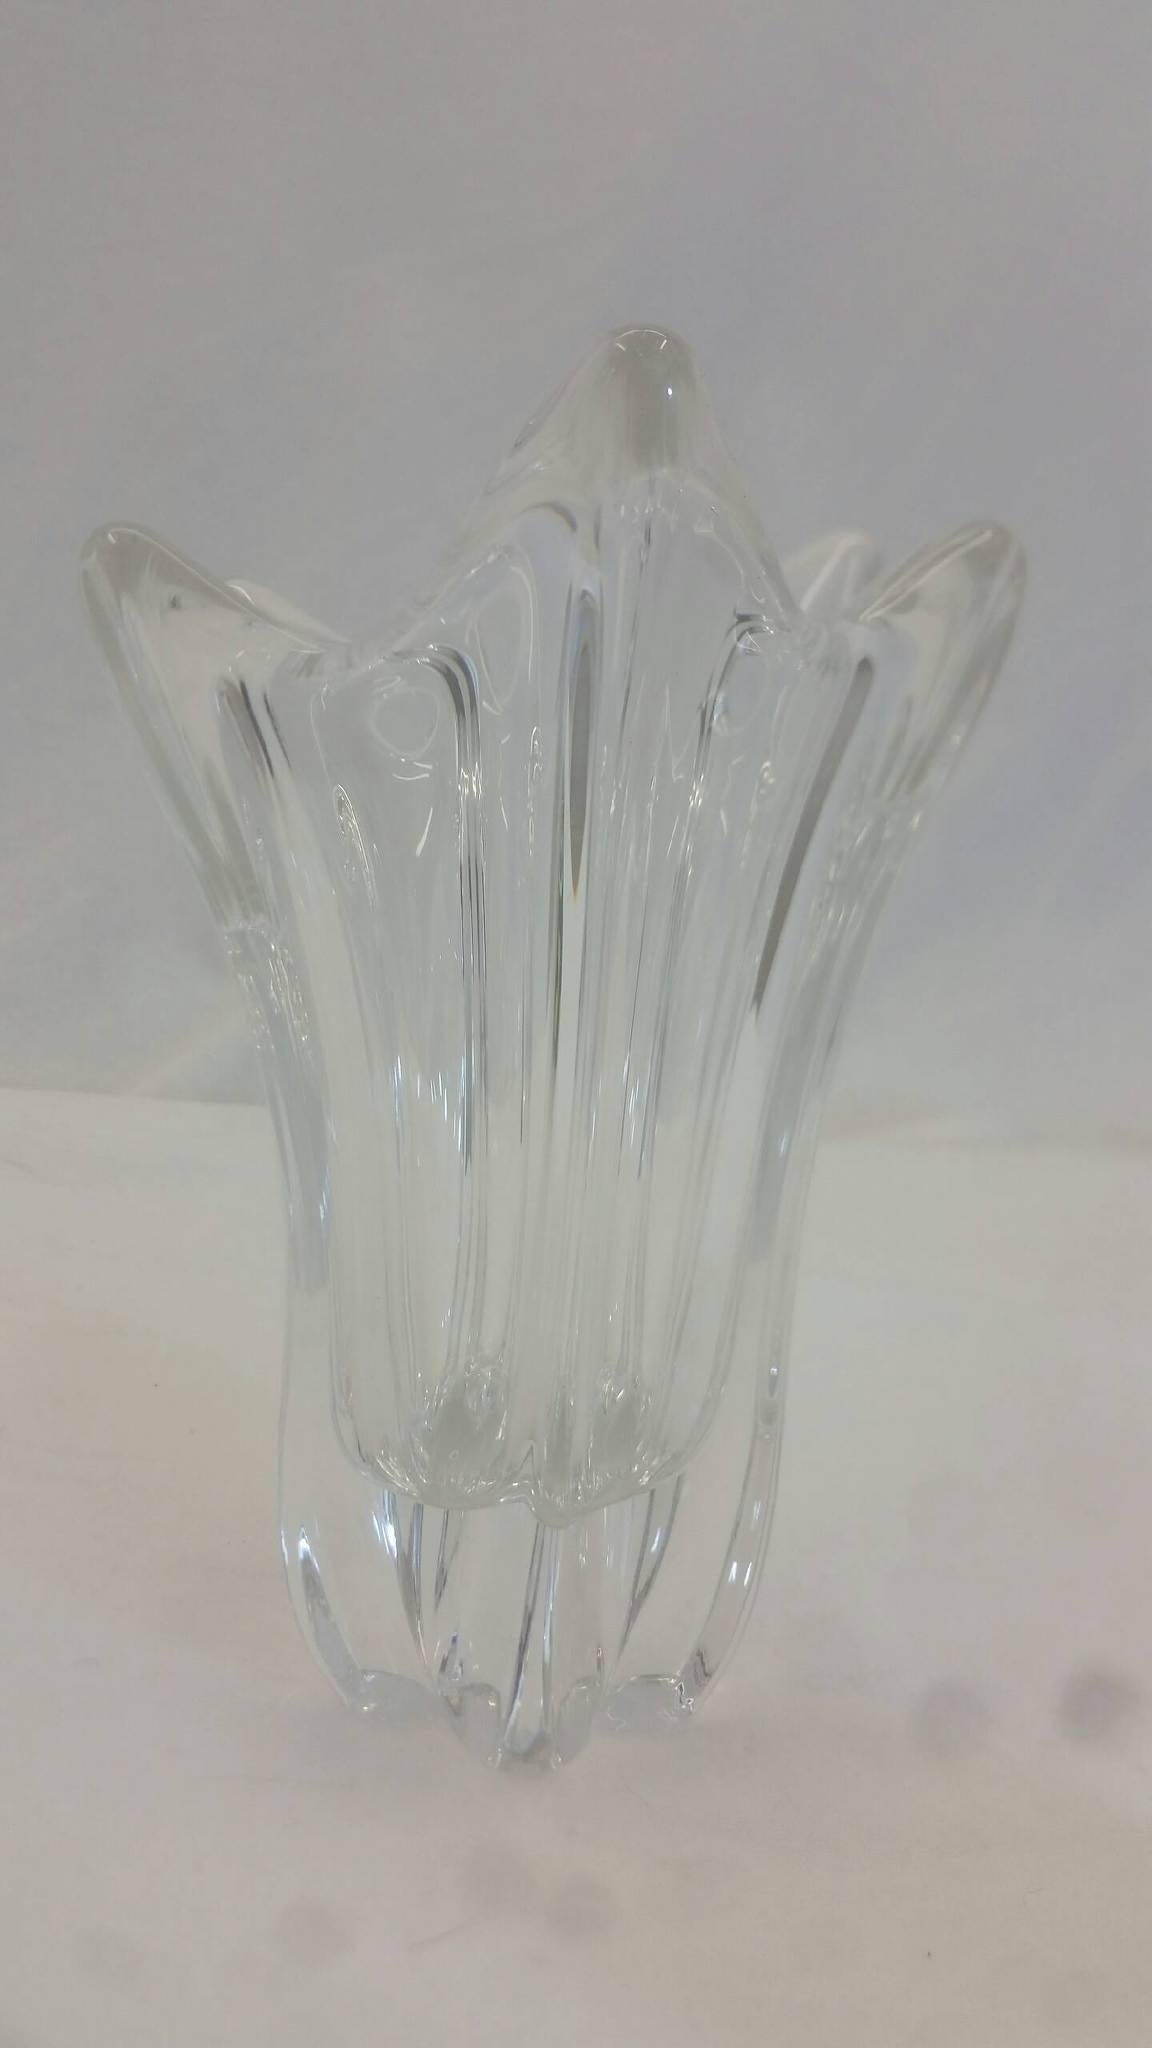 Lovely Daum vase, heavy crystal, laser signed at the bottom of the vase.